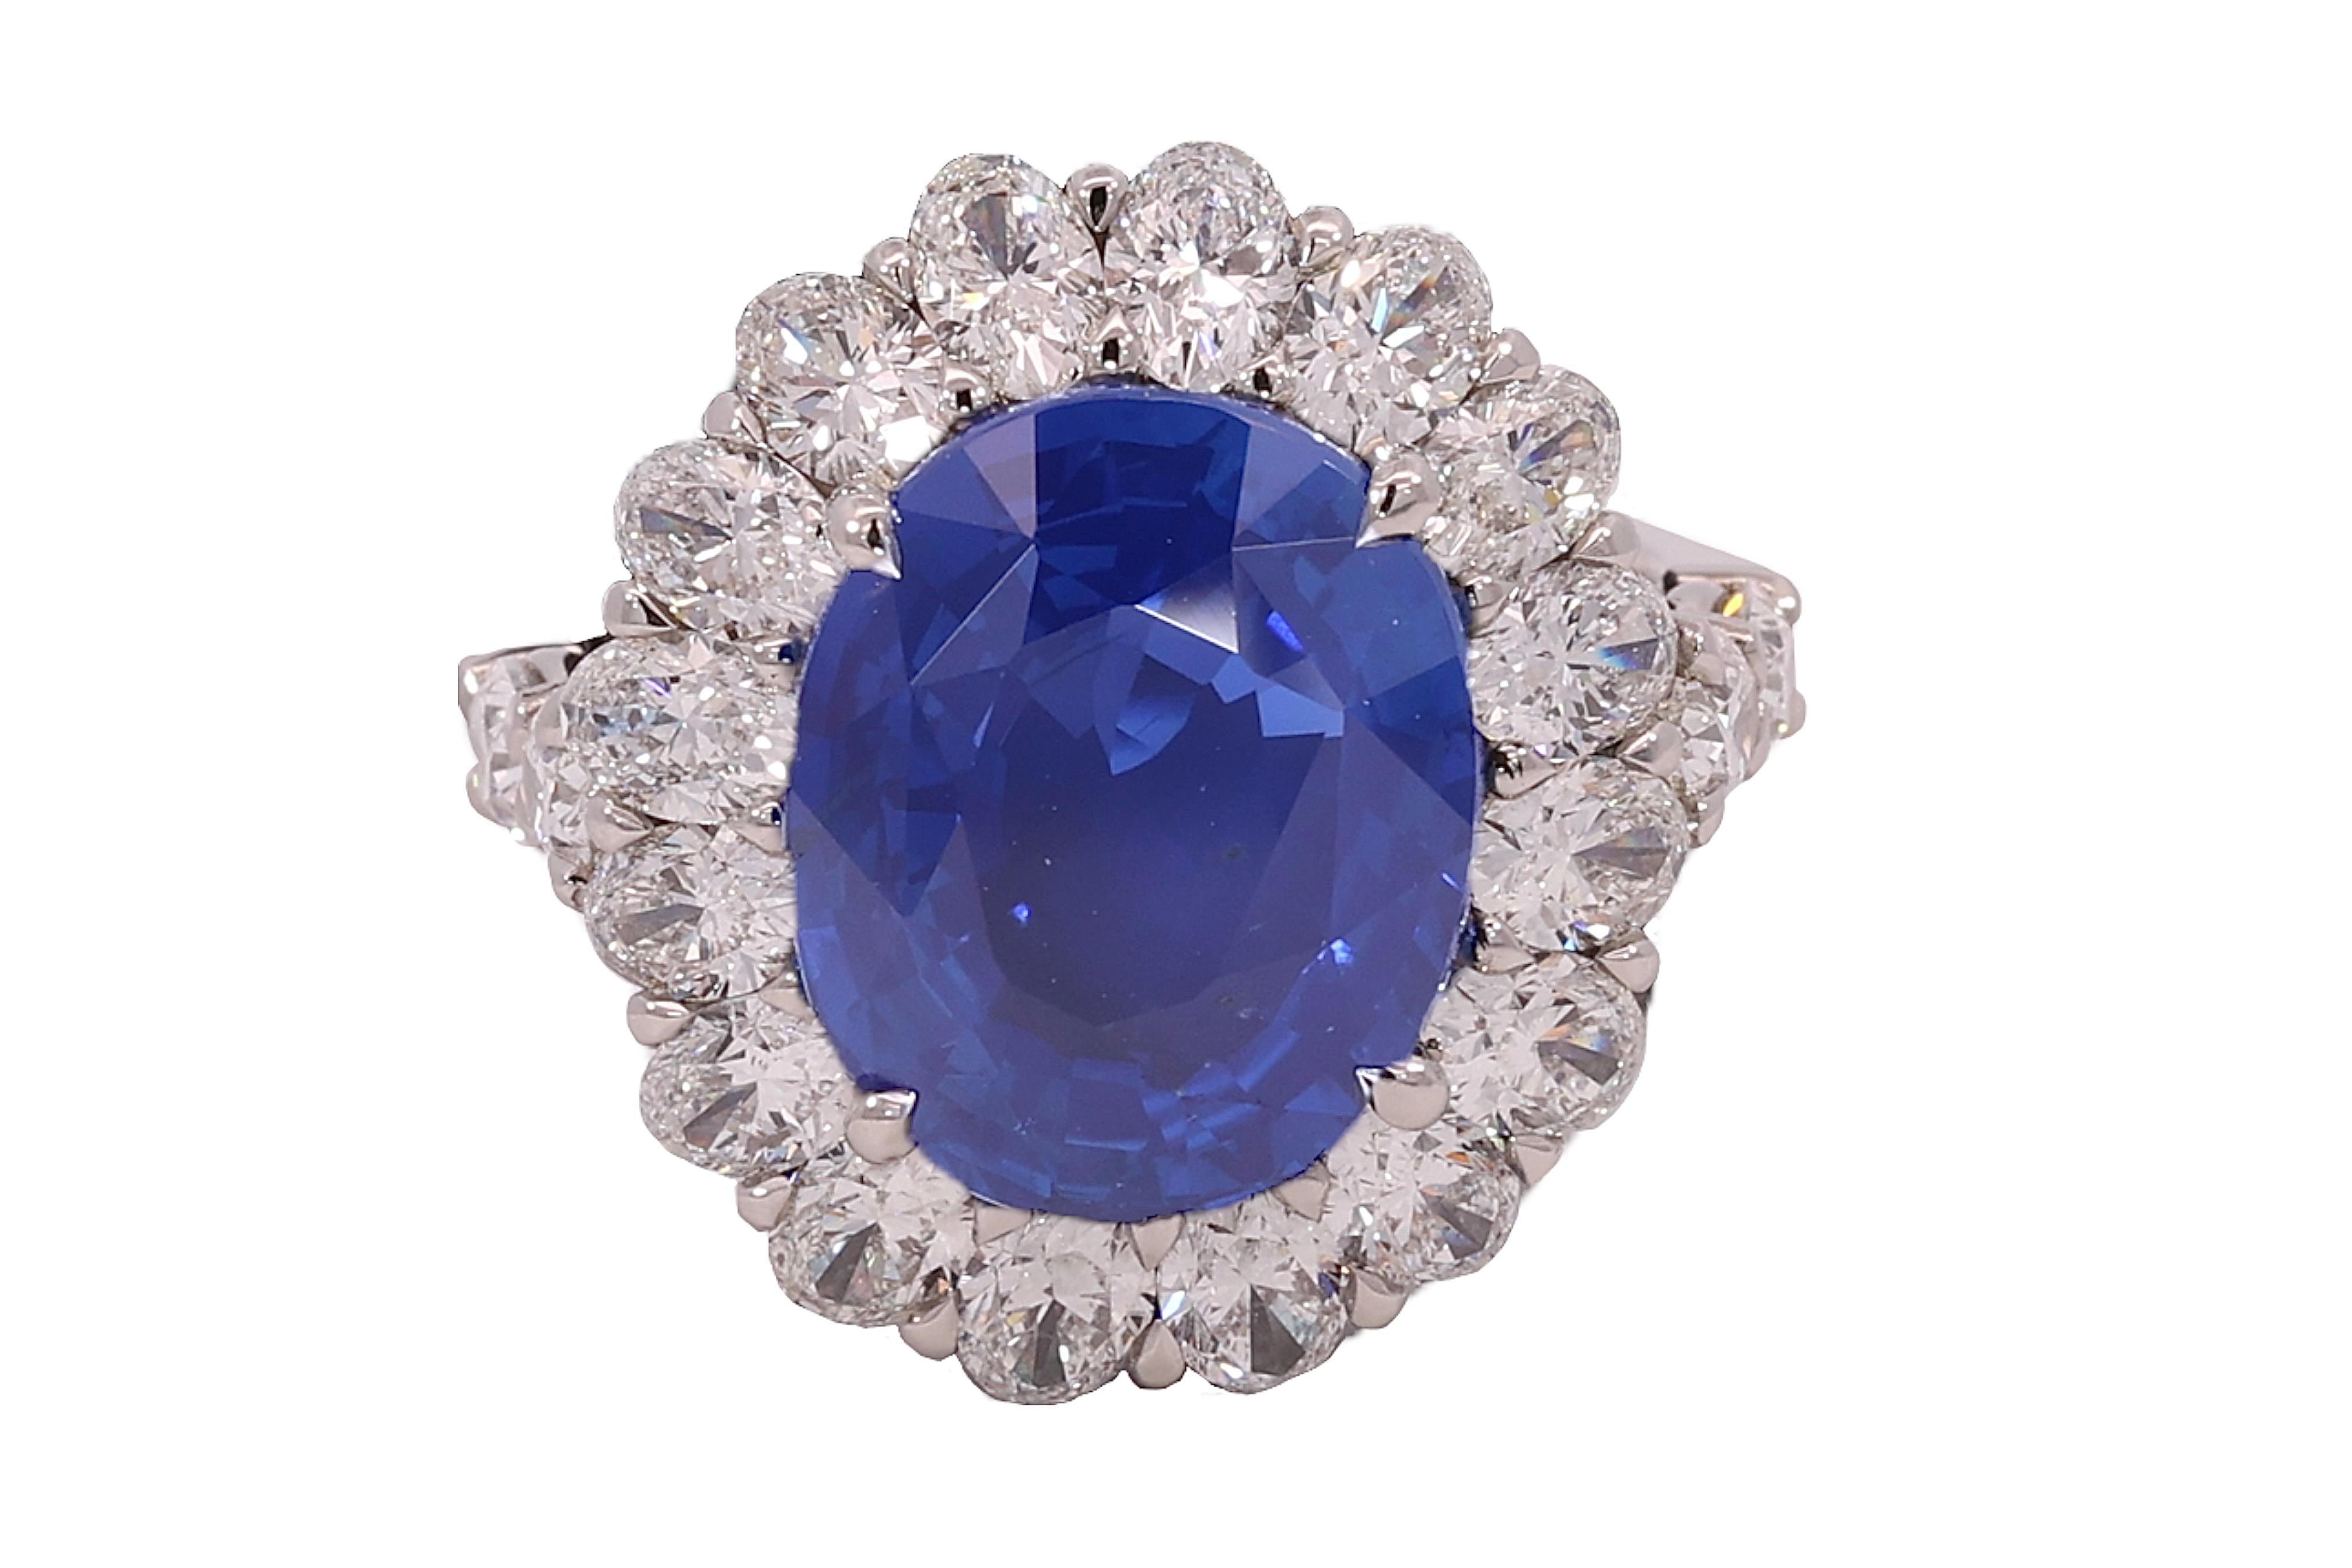 IGI Certified Stunning Platinum Ring with 8.02 ct. Kashmir No Heat Sapphire, 3.75 ct. Diamonds

Diamonds: 3.75 ct.

Sapphire: Blue Natural Kashmir Sapphire, Oval Shaped  8.02 ct. With No indications of treatment. 
Comes with an IGI certificate